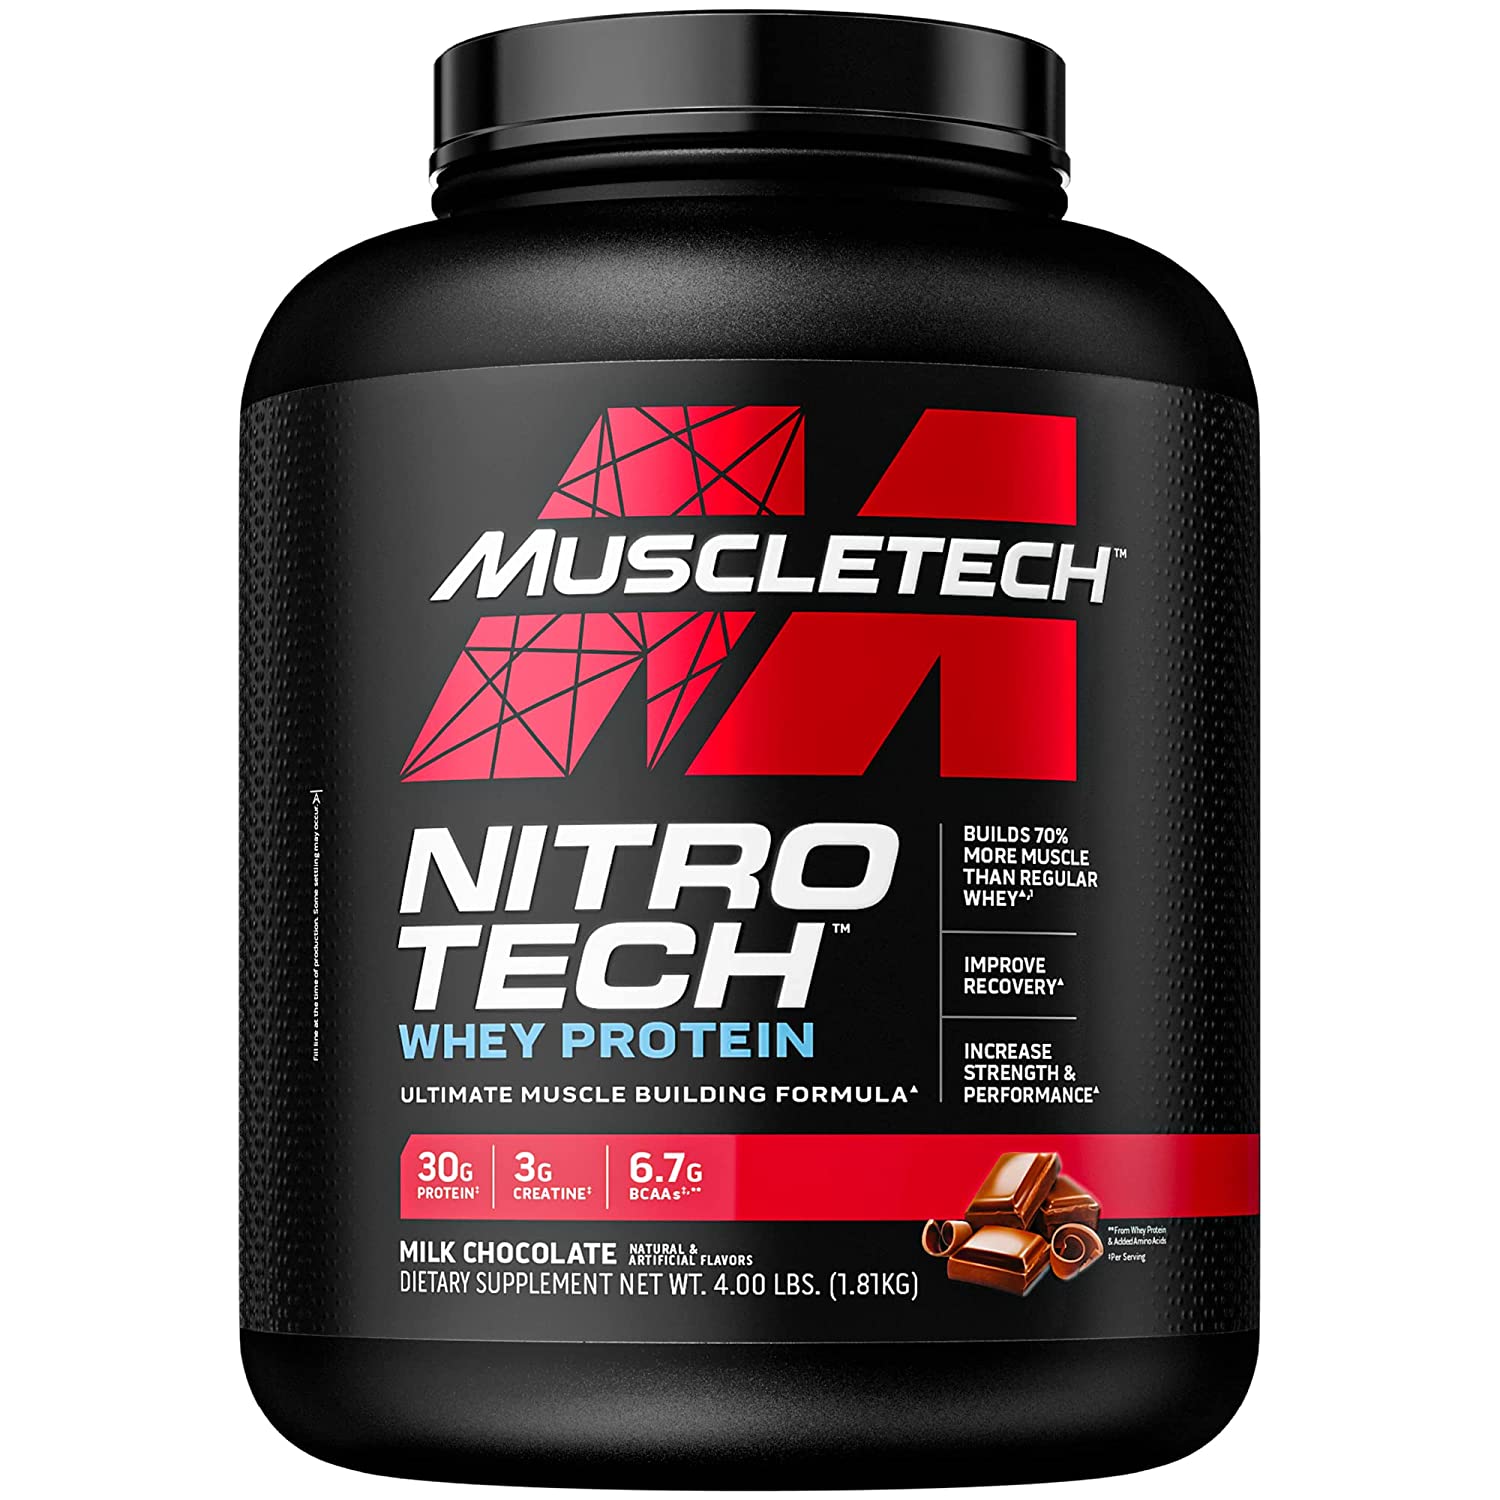 Muscletech NitroTech Whey Protein for Muscle Gain